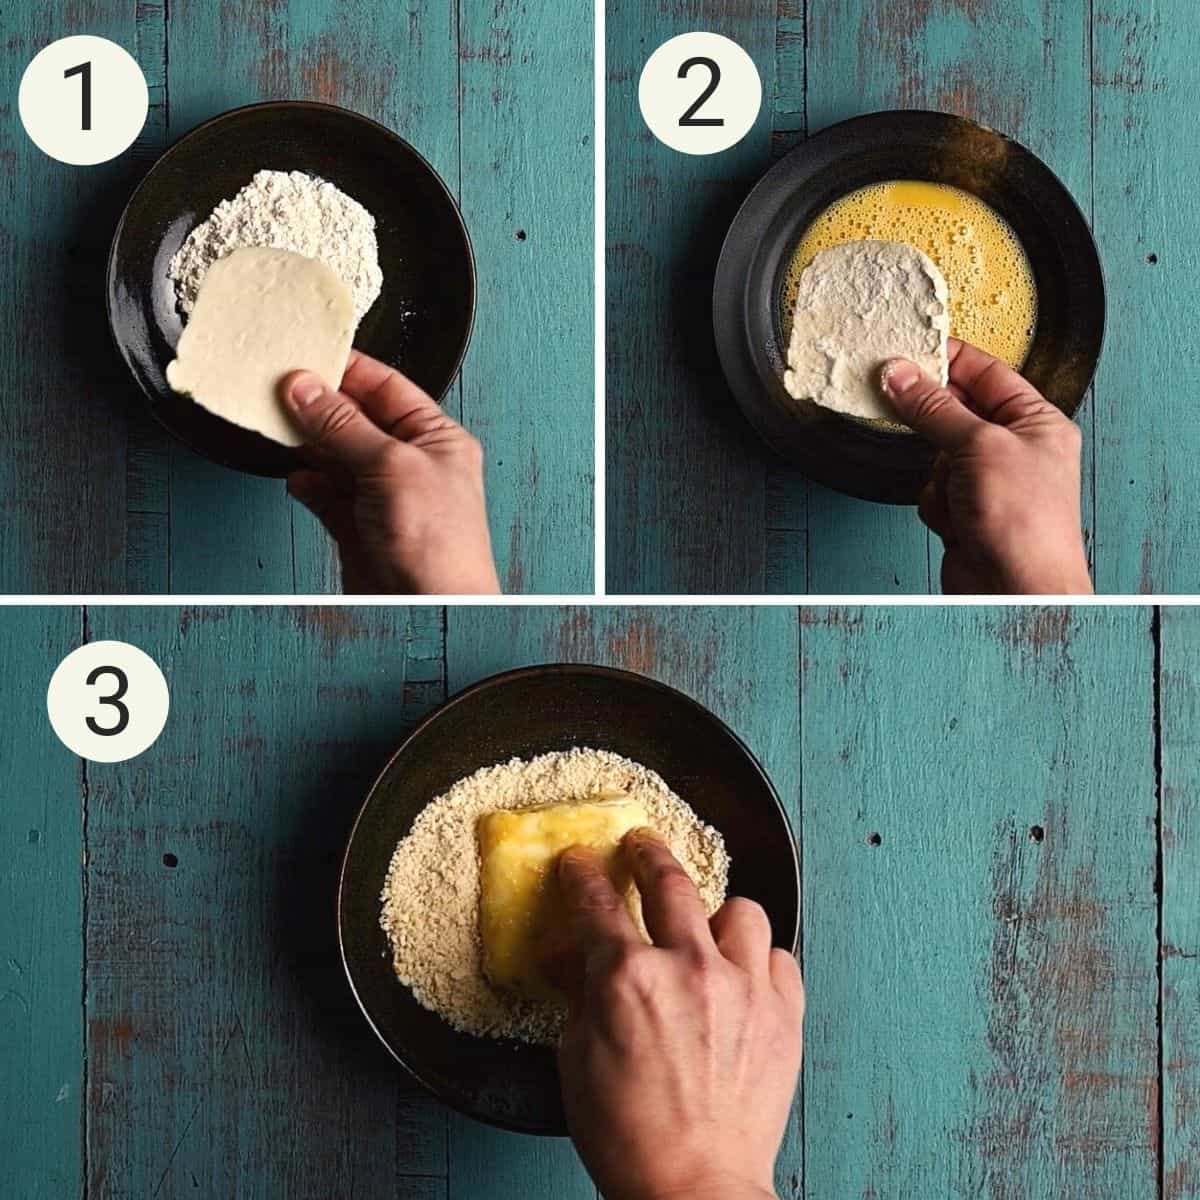 a collage of 3 images showing how to prepare halloumi for frying.